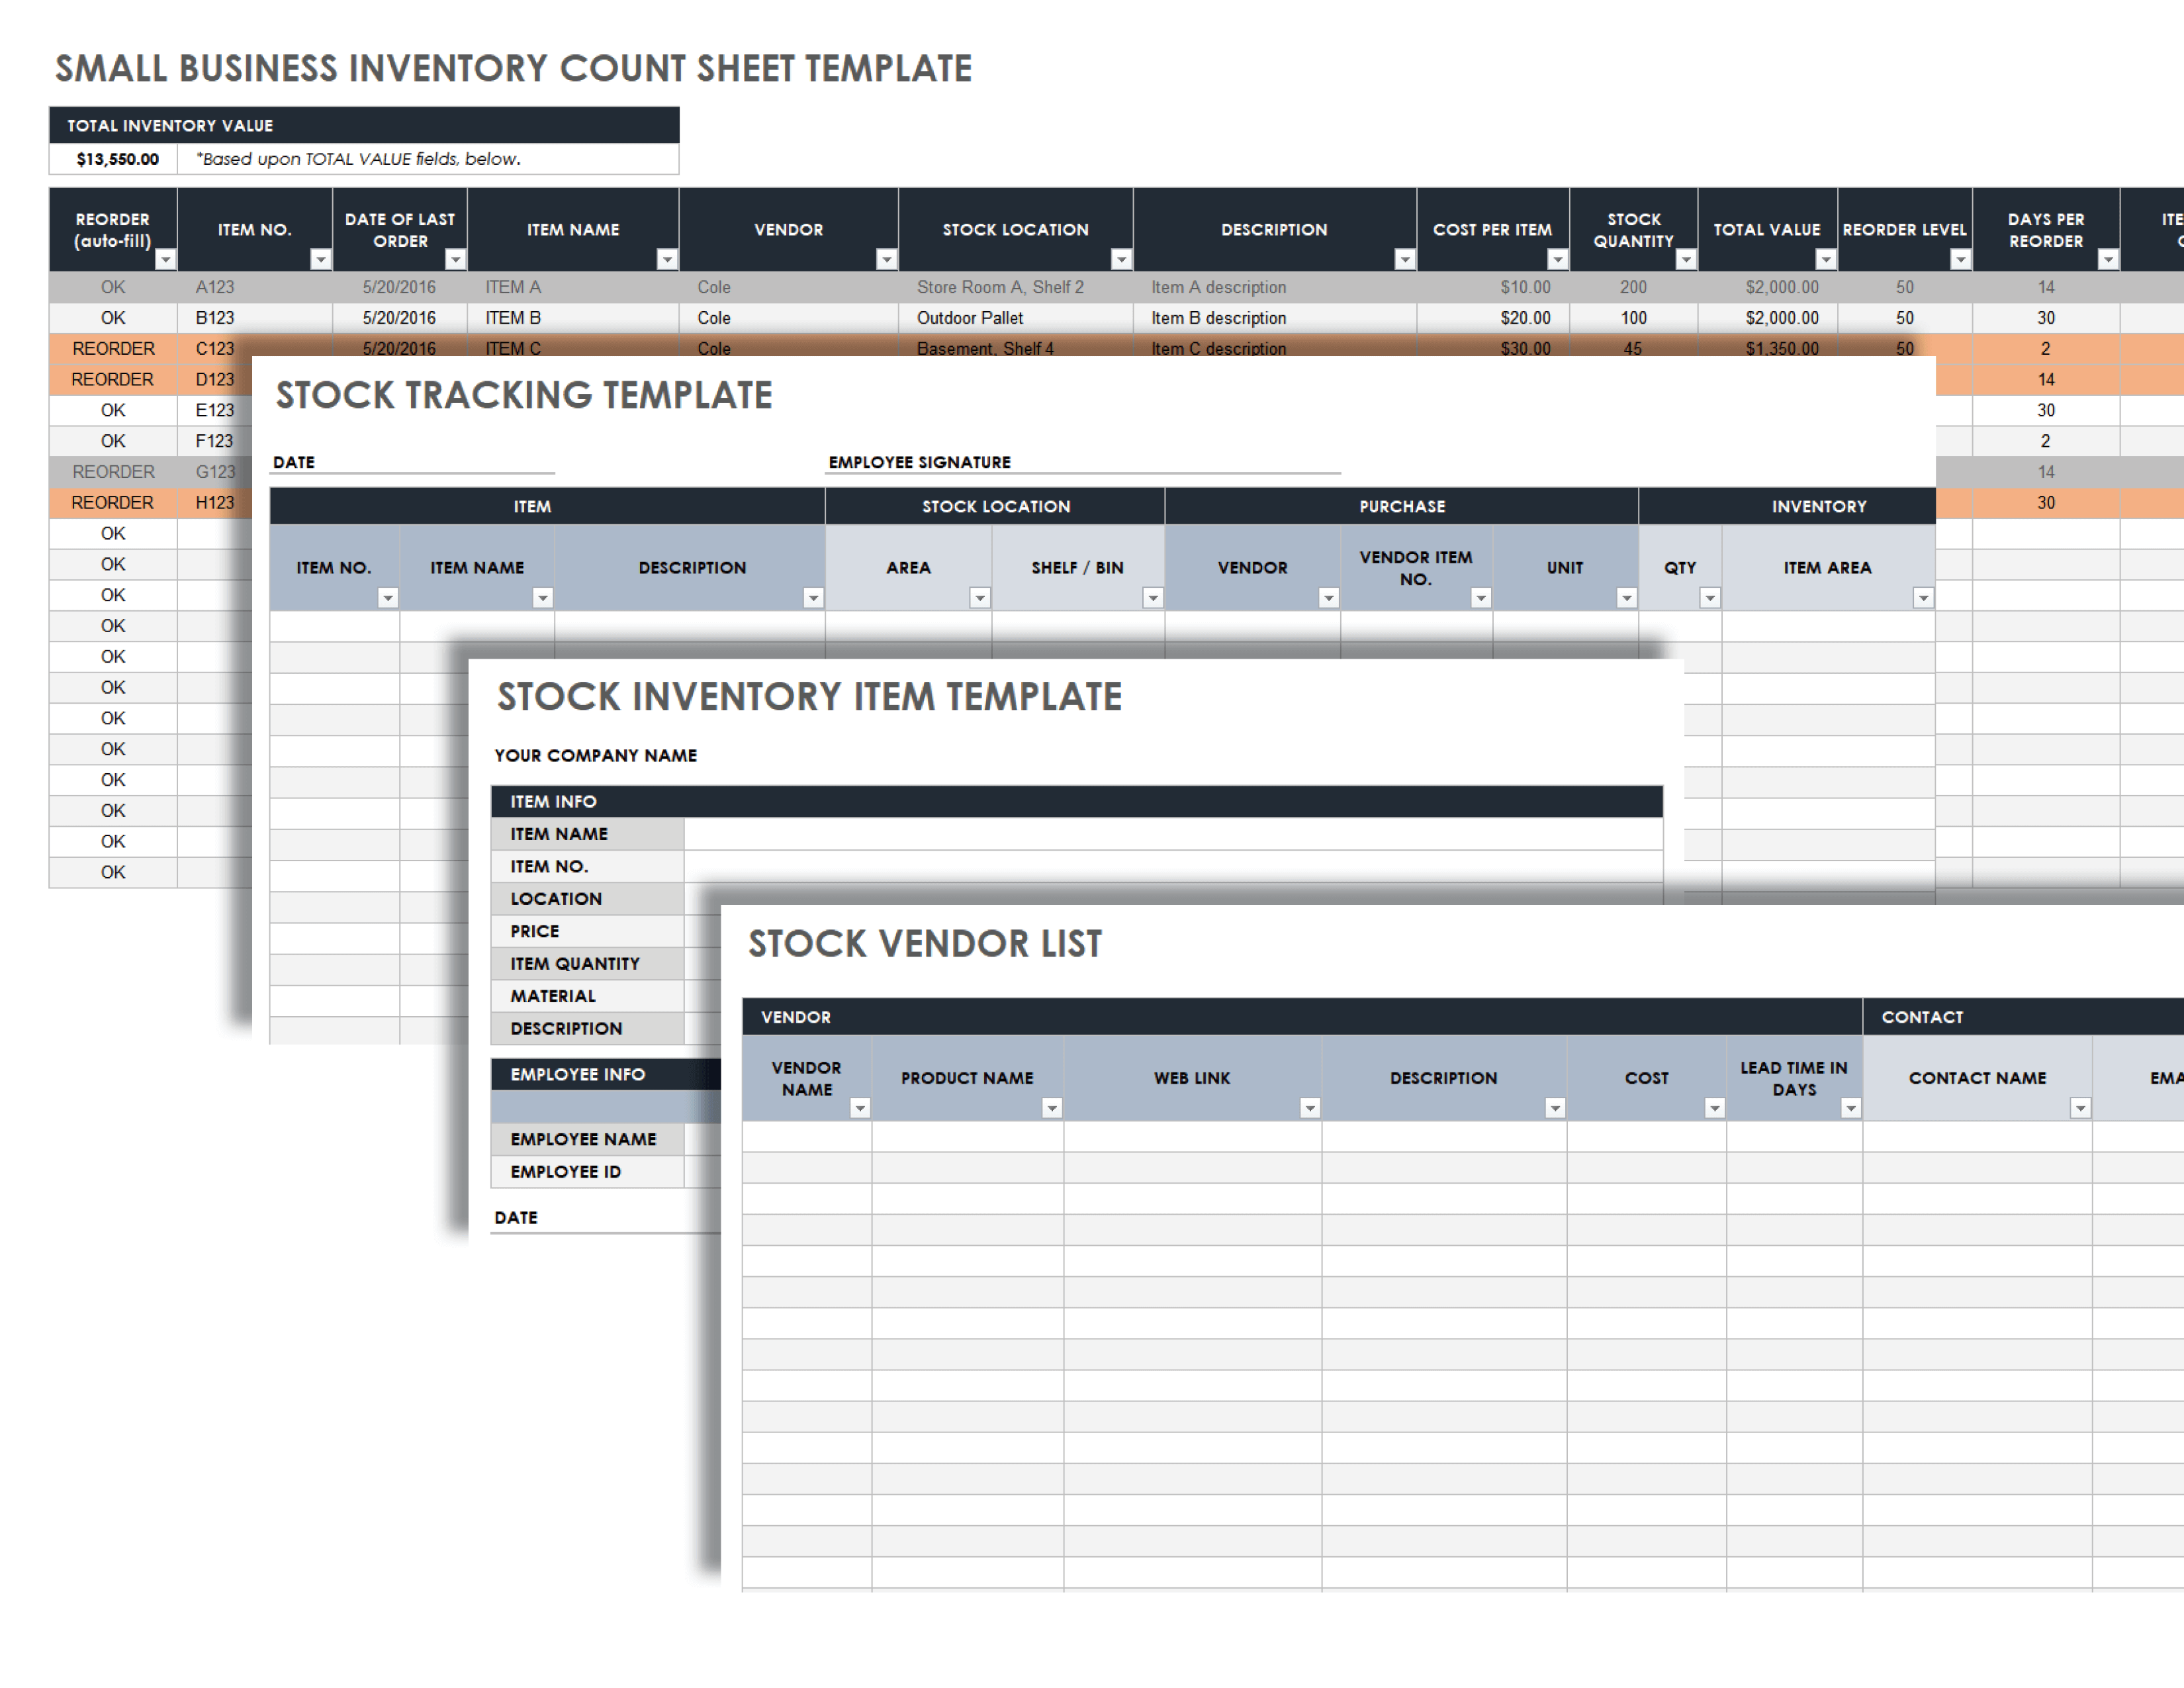 Small Business Inventory Count Sheet Template